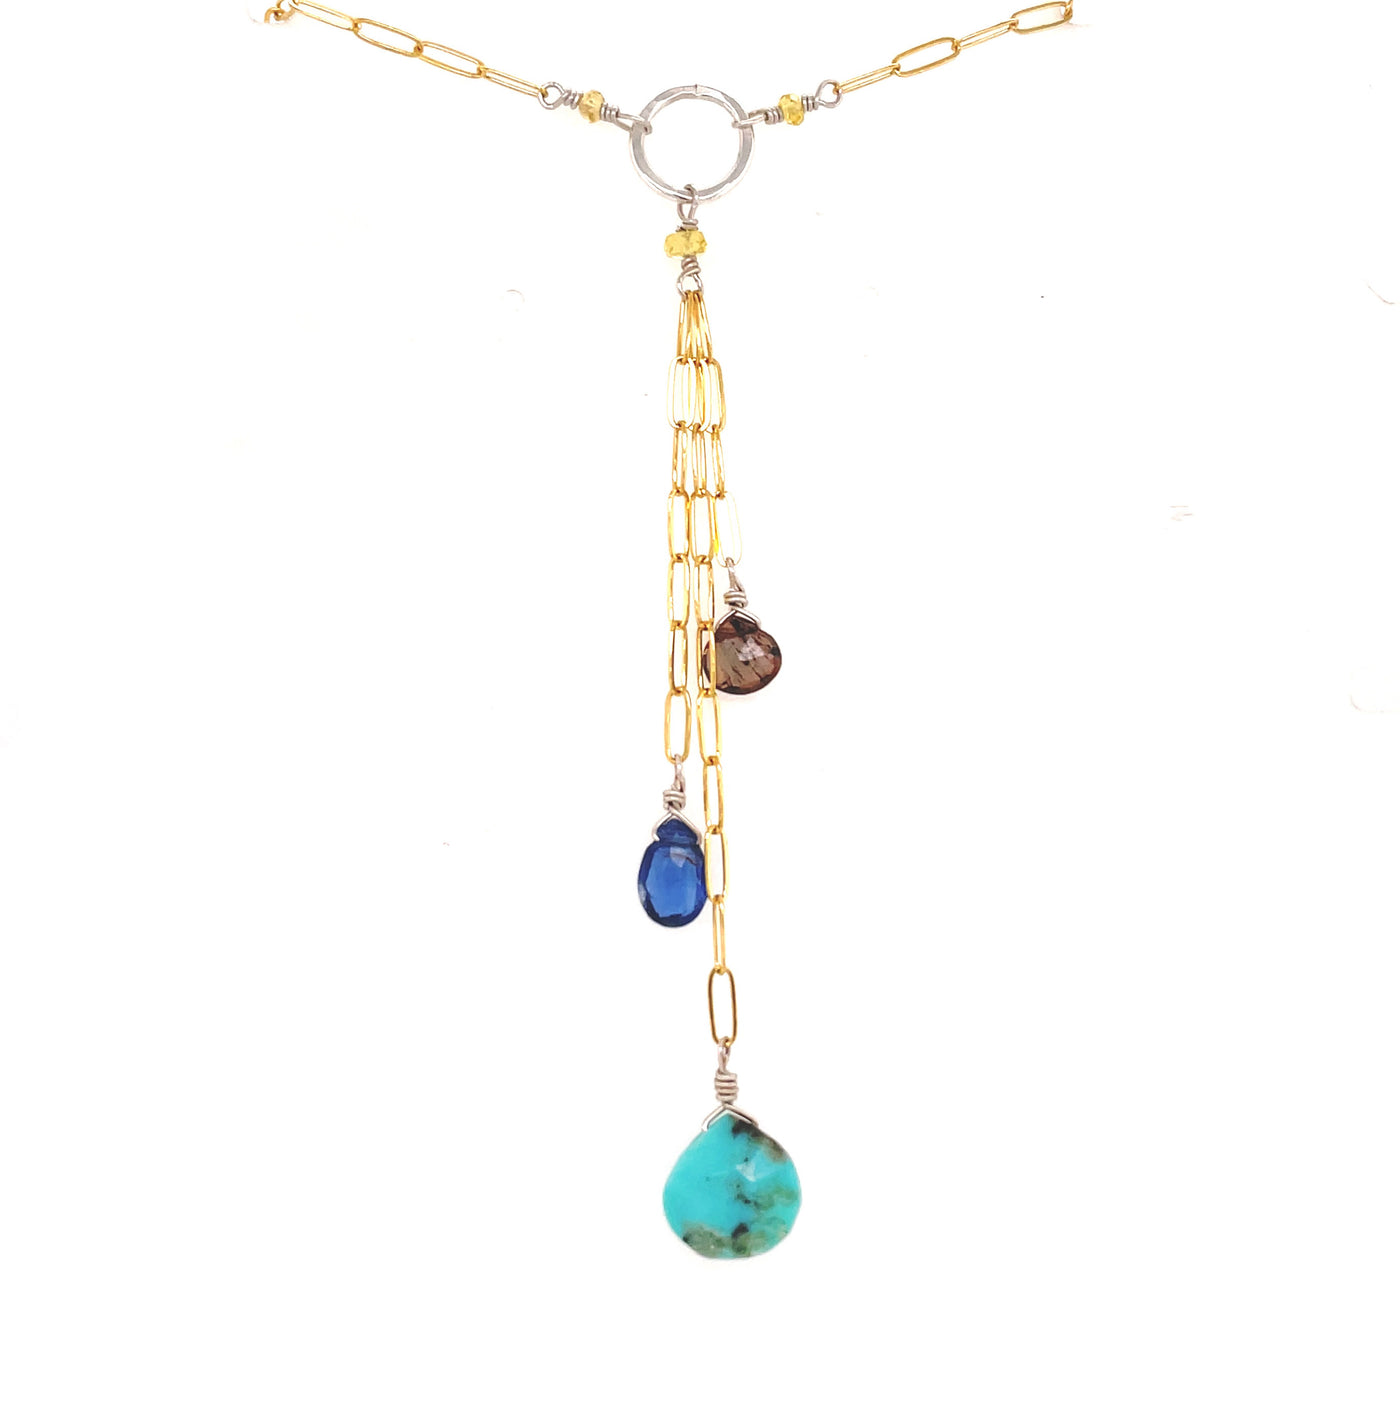 Prismatic Springs Collection - Triple Springs Necklace